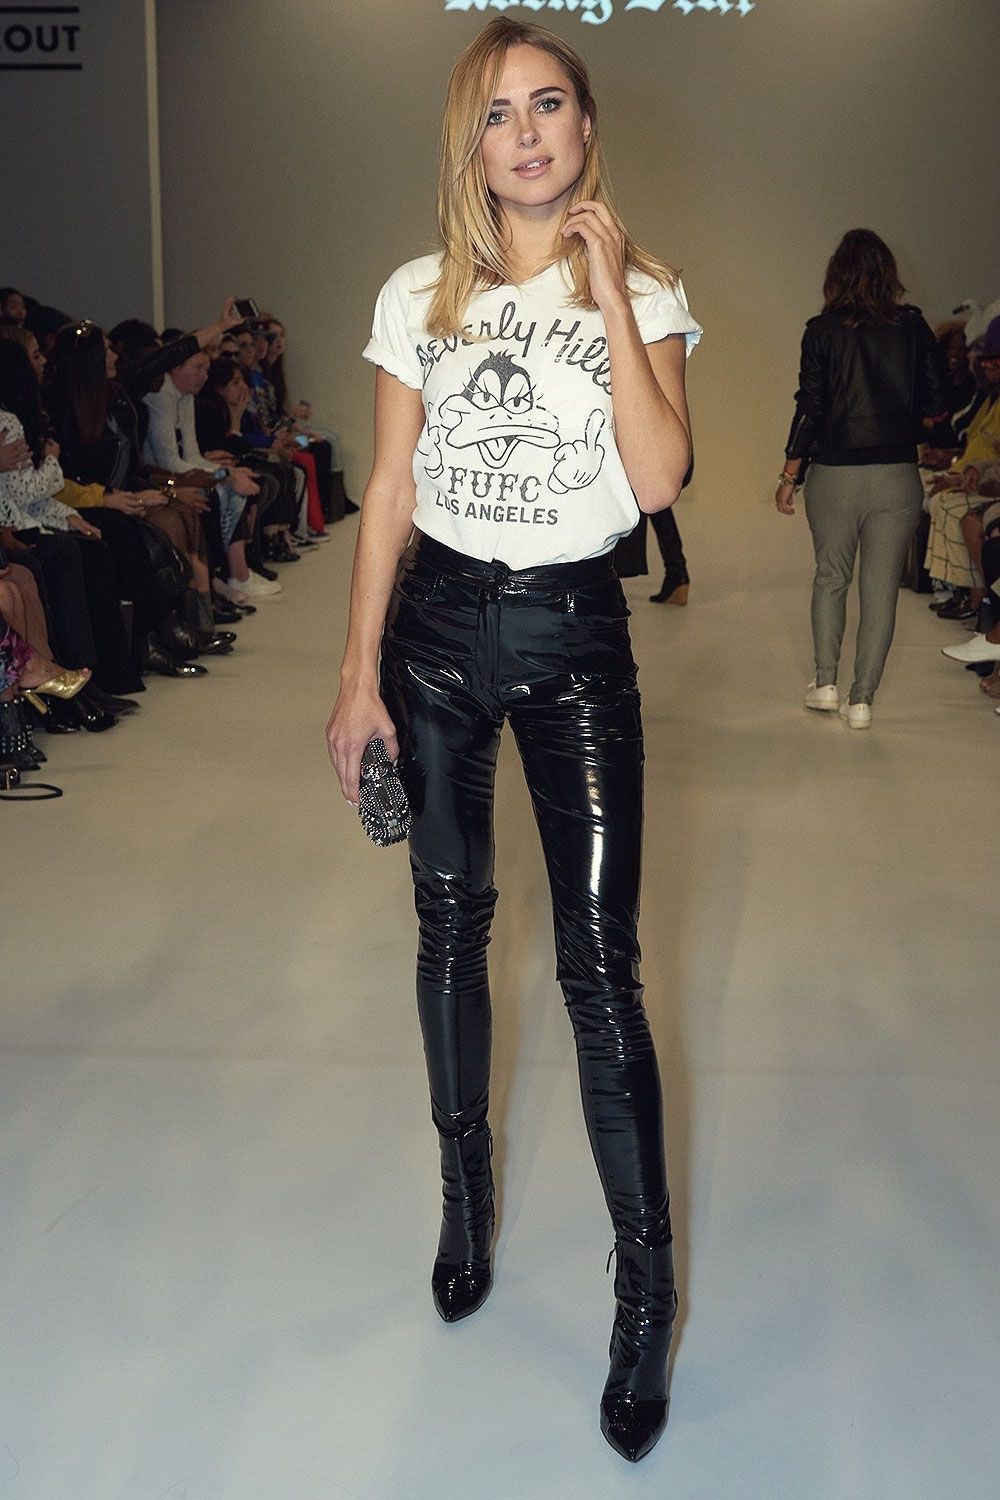 Kimberley garner leather pants london fashion week, made in chelsea: Fashion photography,  Fashion show,  fashion model,  Kimberley Garner,  London Fashion Week,  Leather Pant Outfits  